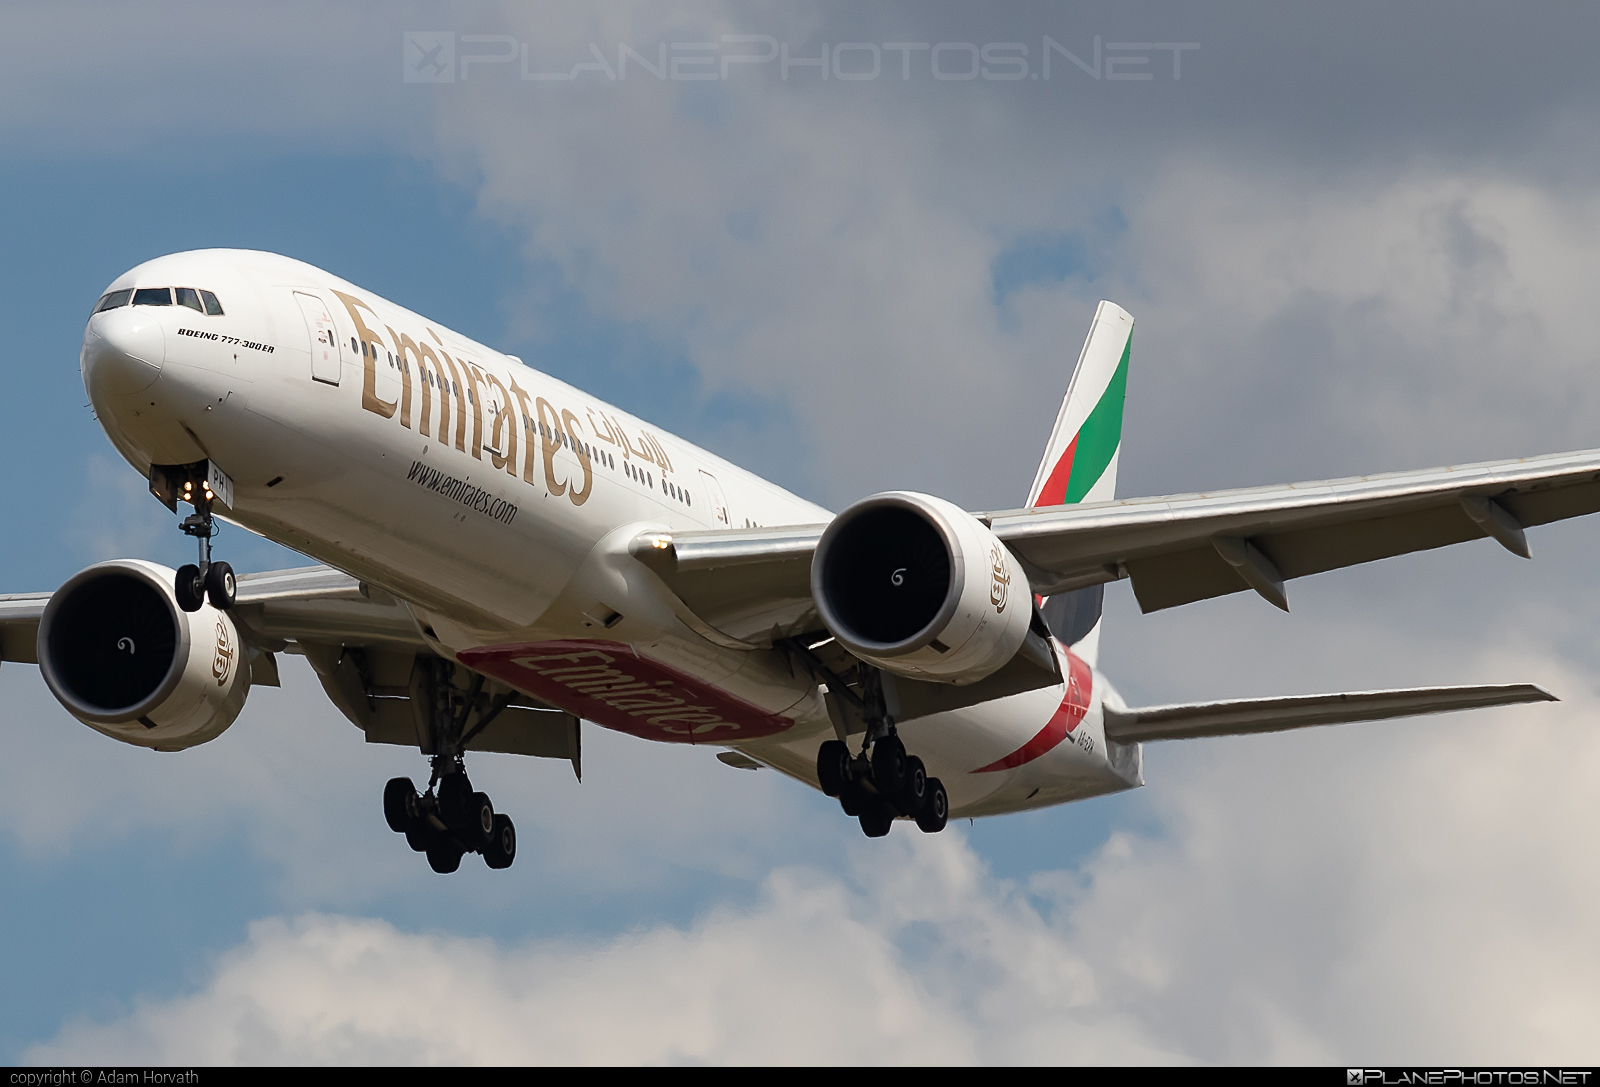 Boeing 777-300ER - A6-EPH operated by Emirates #FerencLisztIntl #b777 #b777er #boeing #boeing777 #emirates #tripleseven